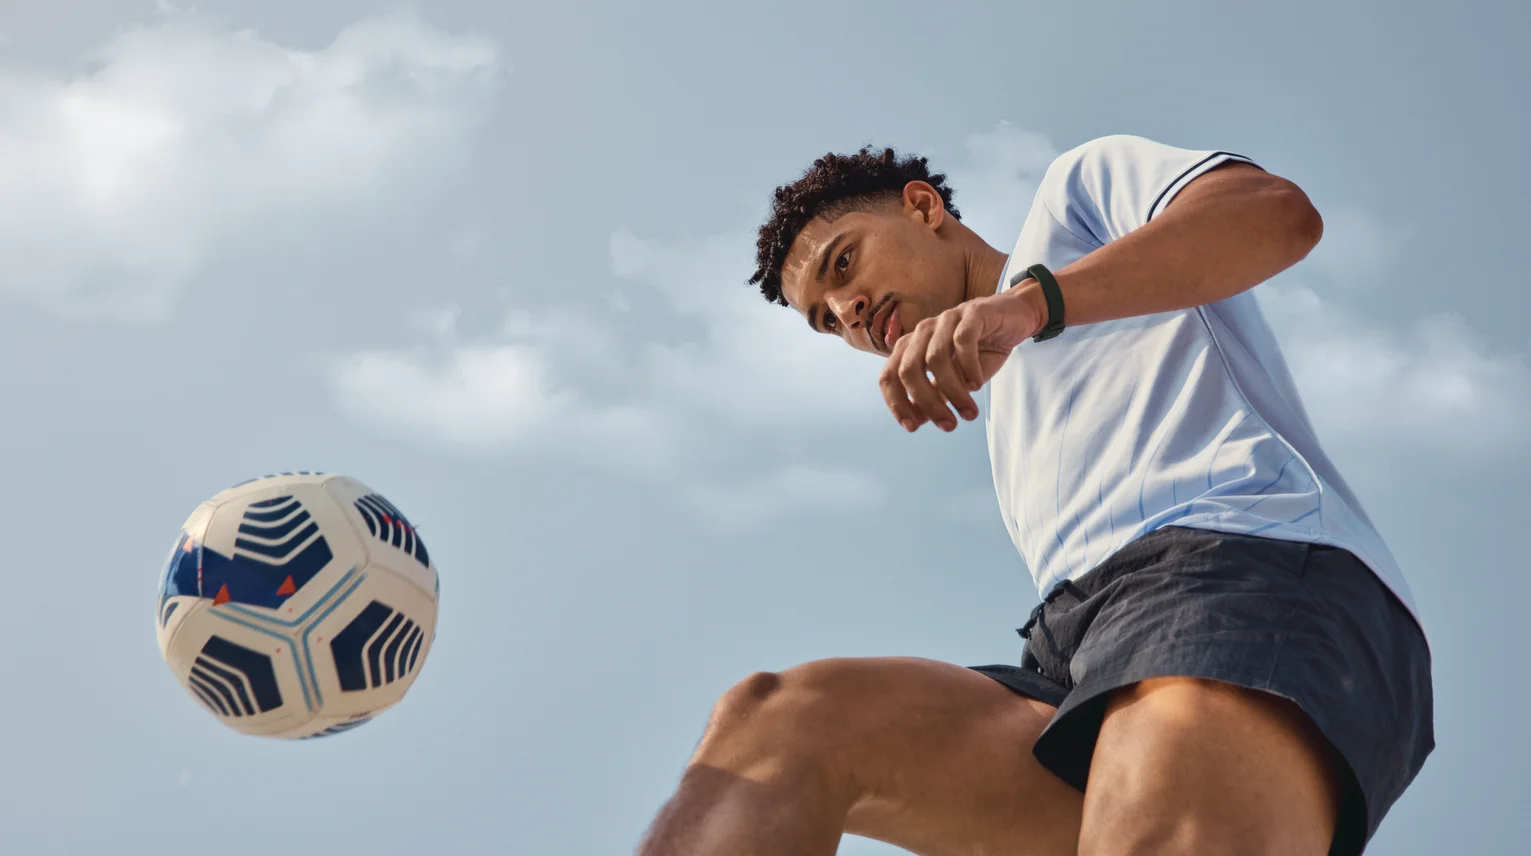 A photograph of a young man wearing athleisure clothing and playing soccer with Inspire 3 on his wrist.